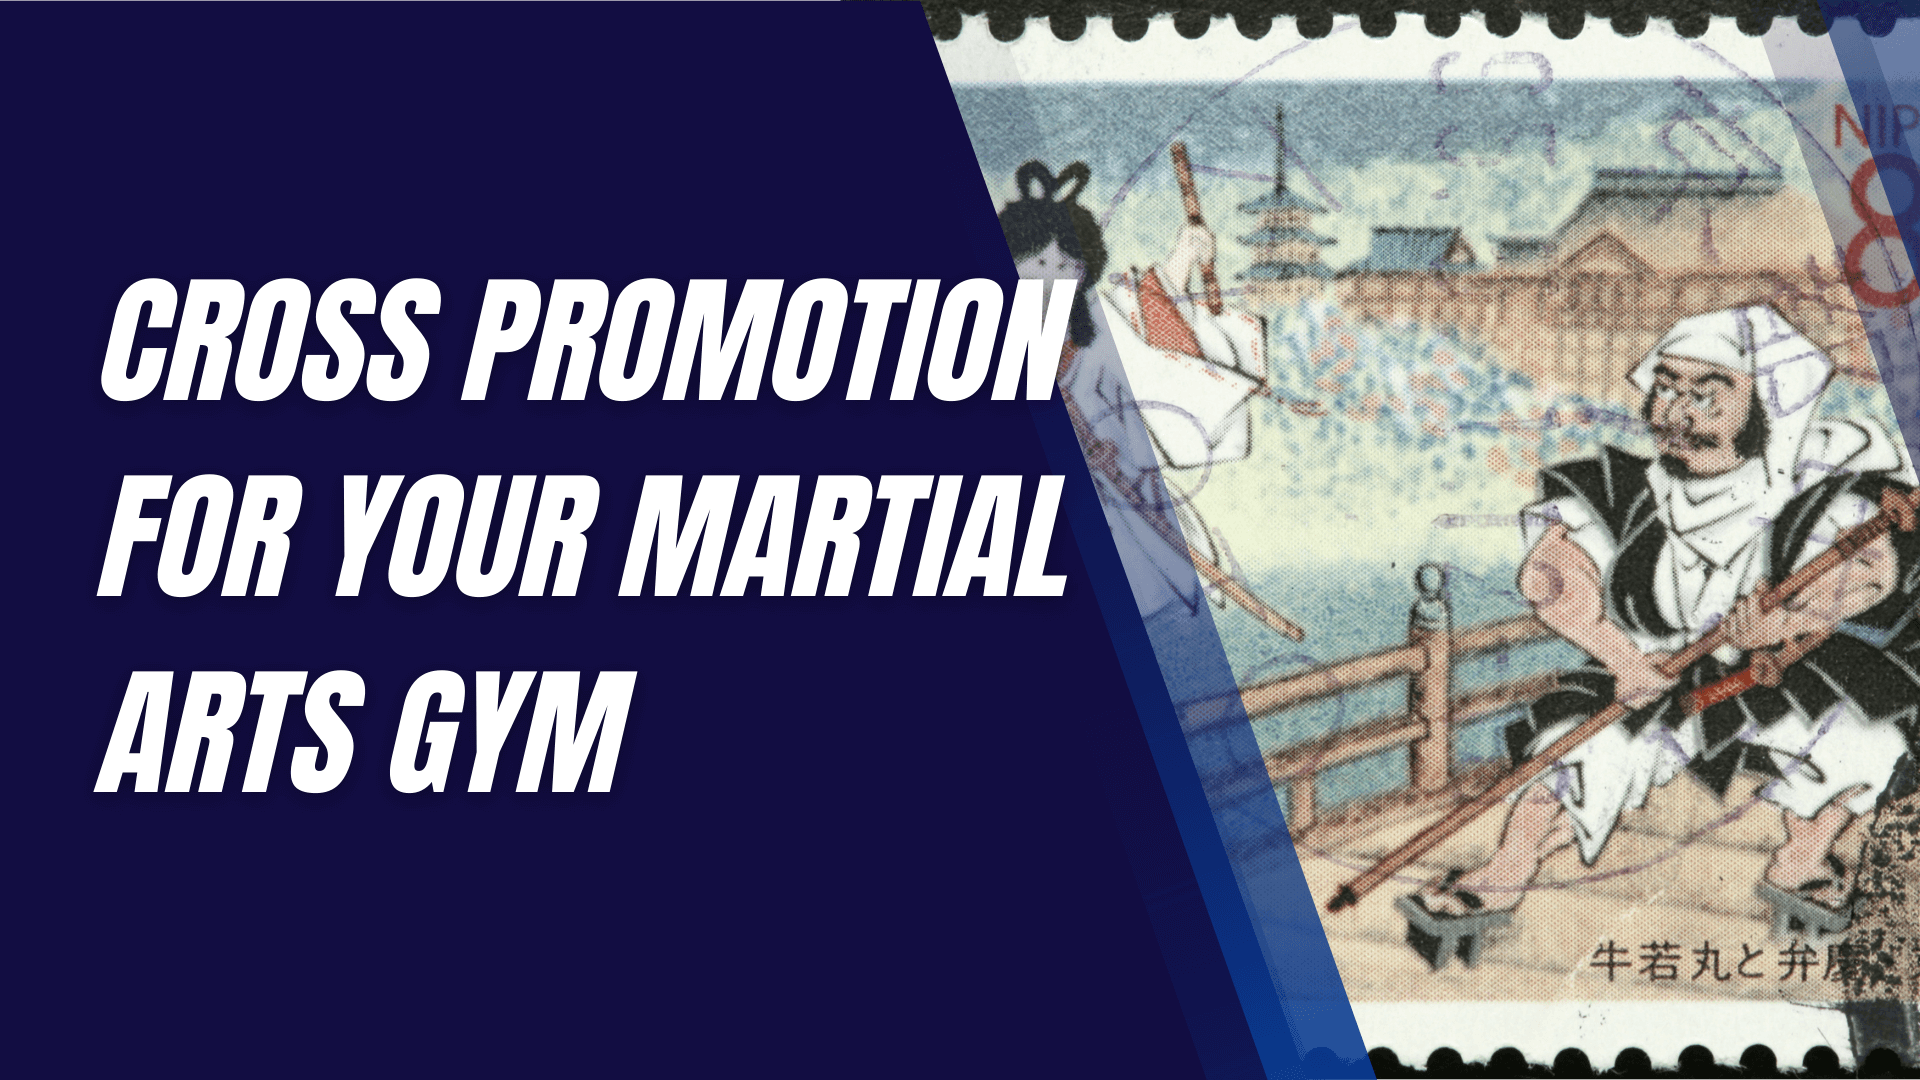 Cross Promotion for Your Martial Arts Gym